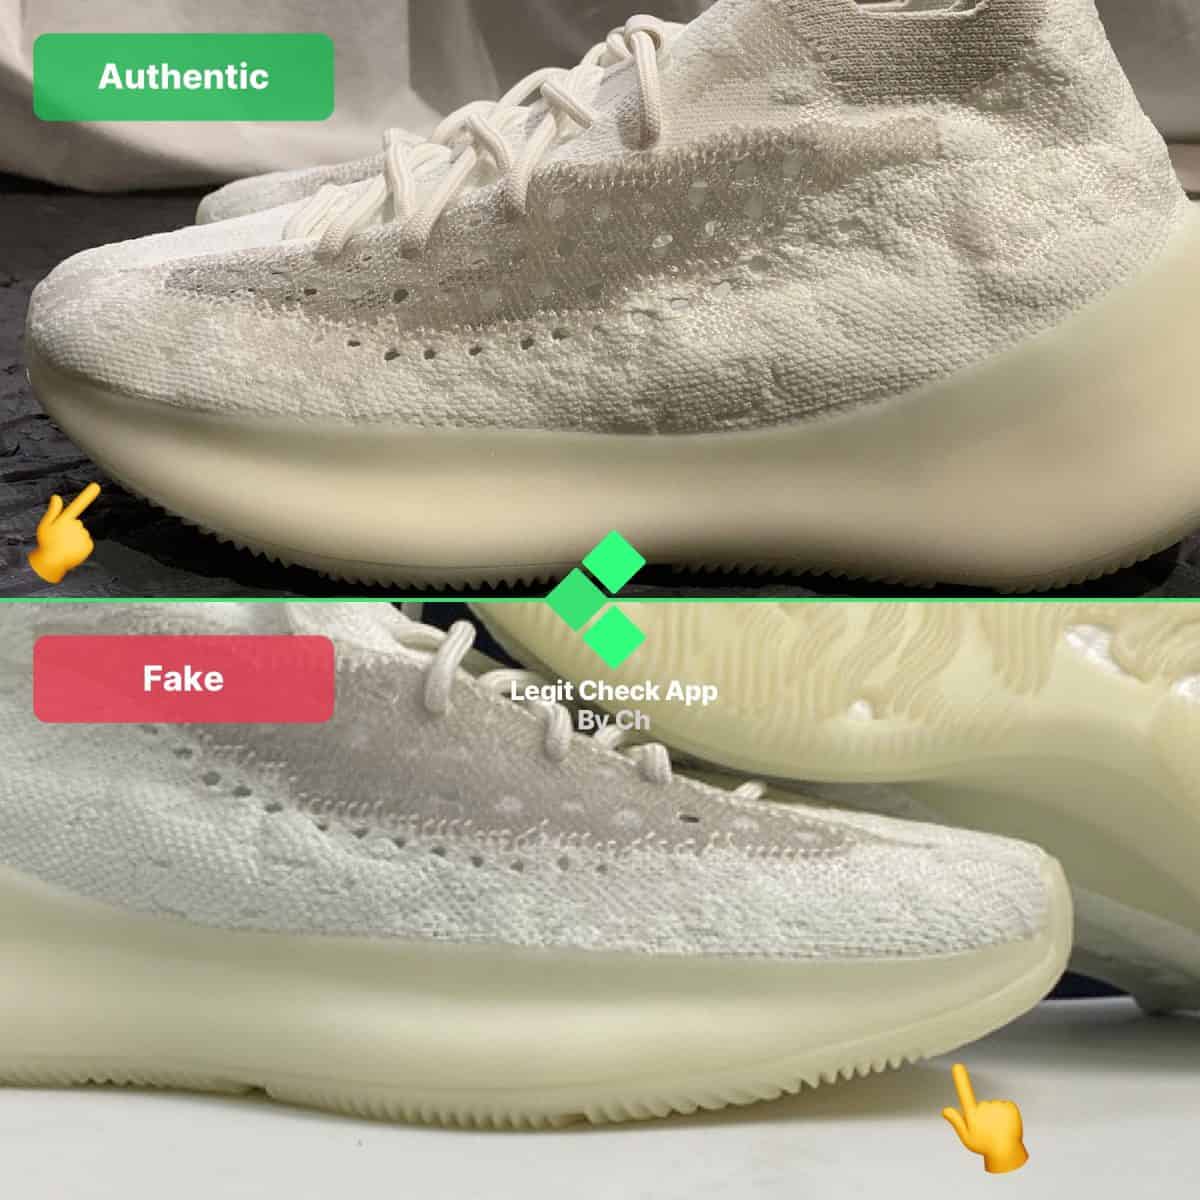 yeezy 380 calcite glow authentication guide